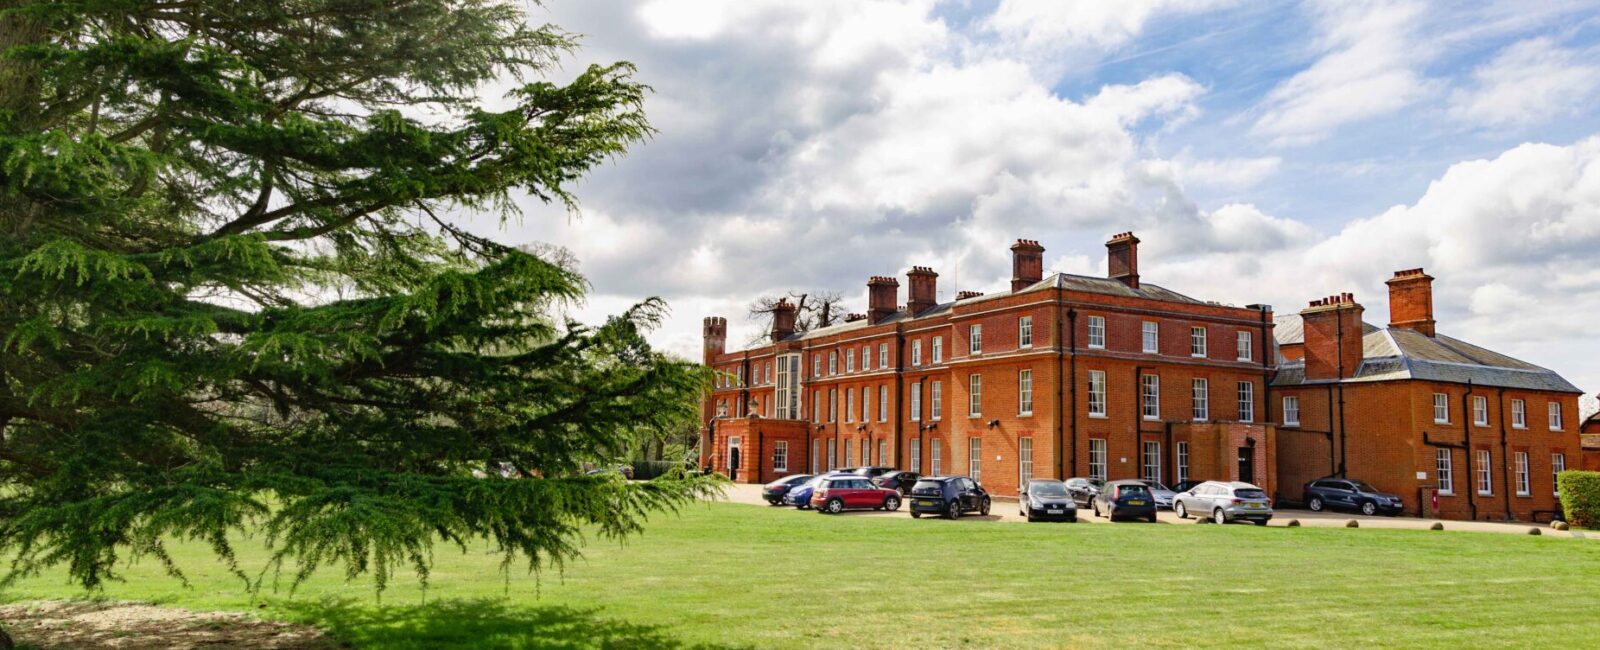 Cumberland Lodge has its location deep in Windsor Great Park.